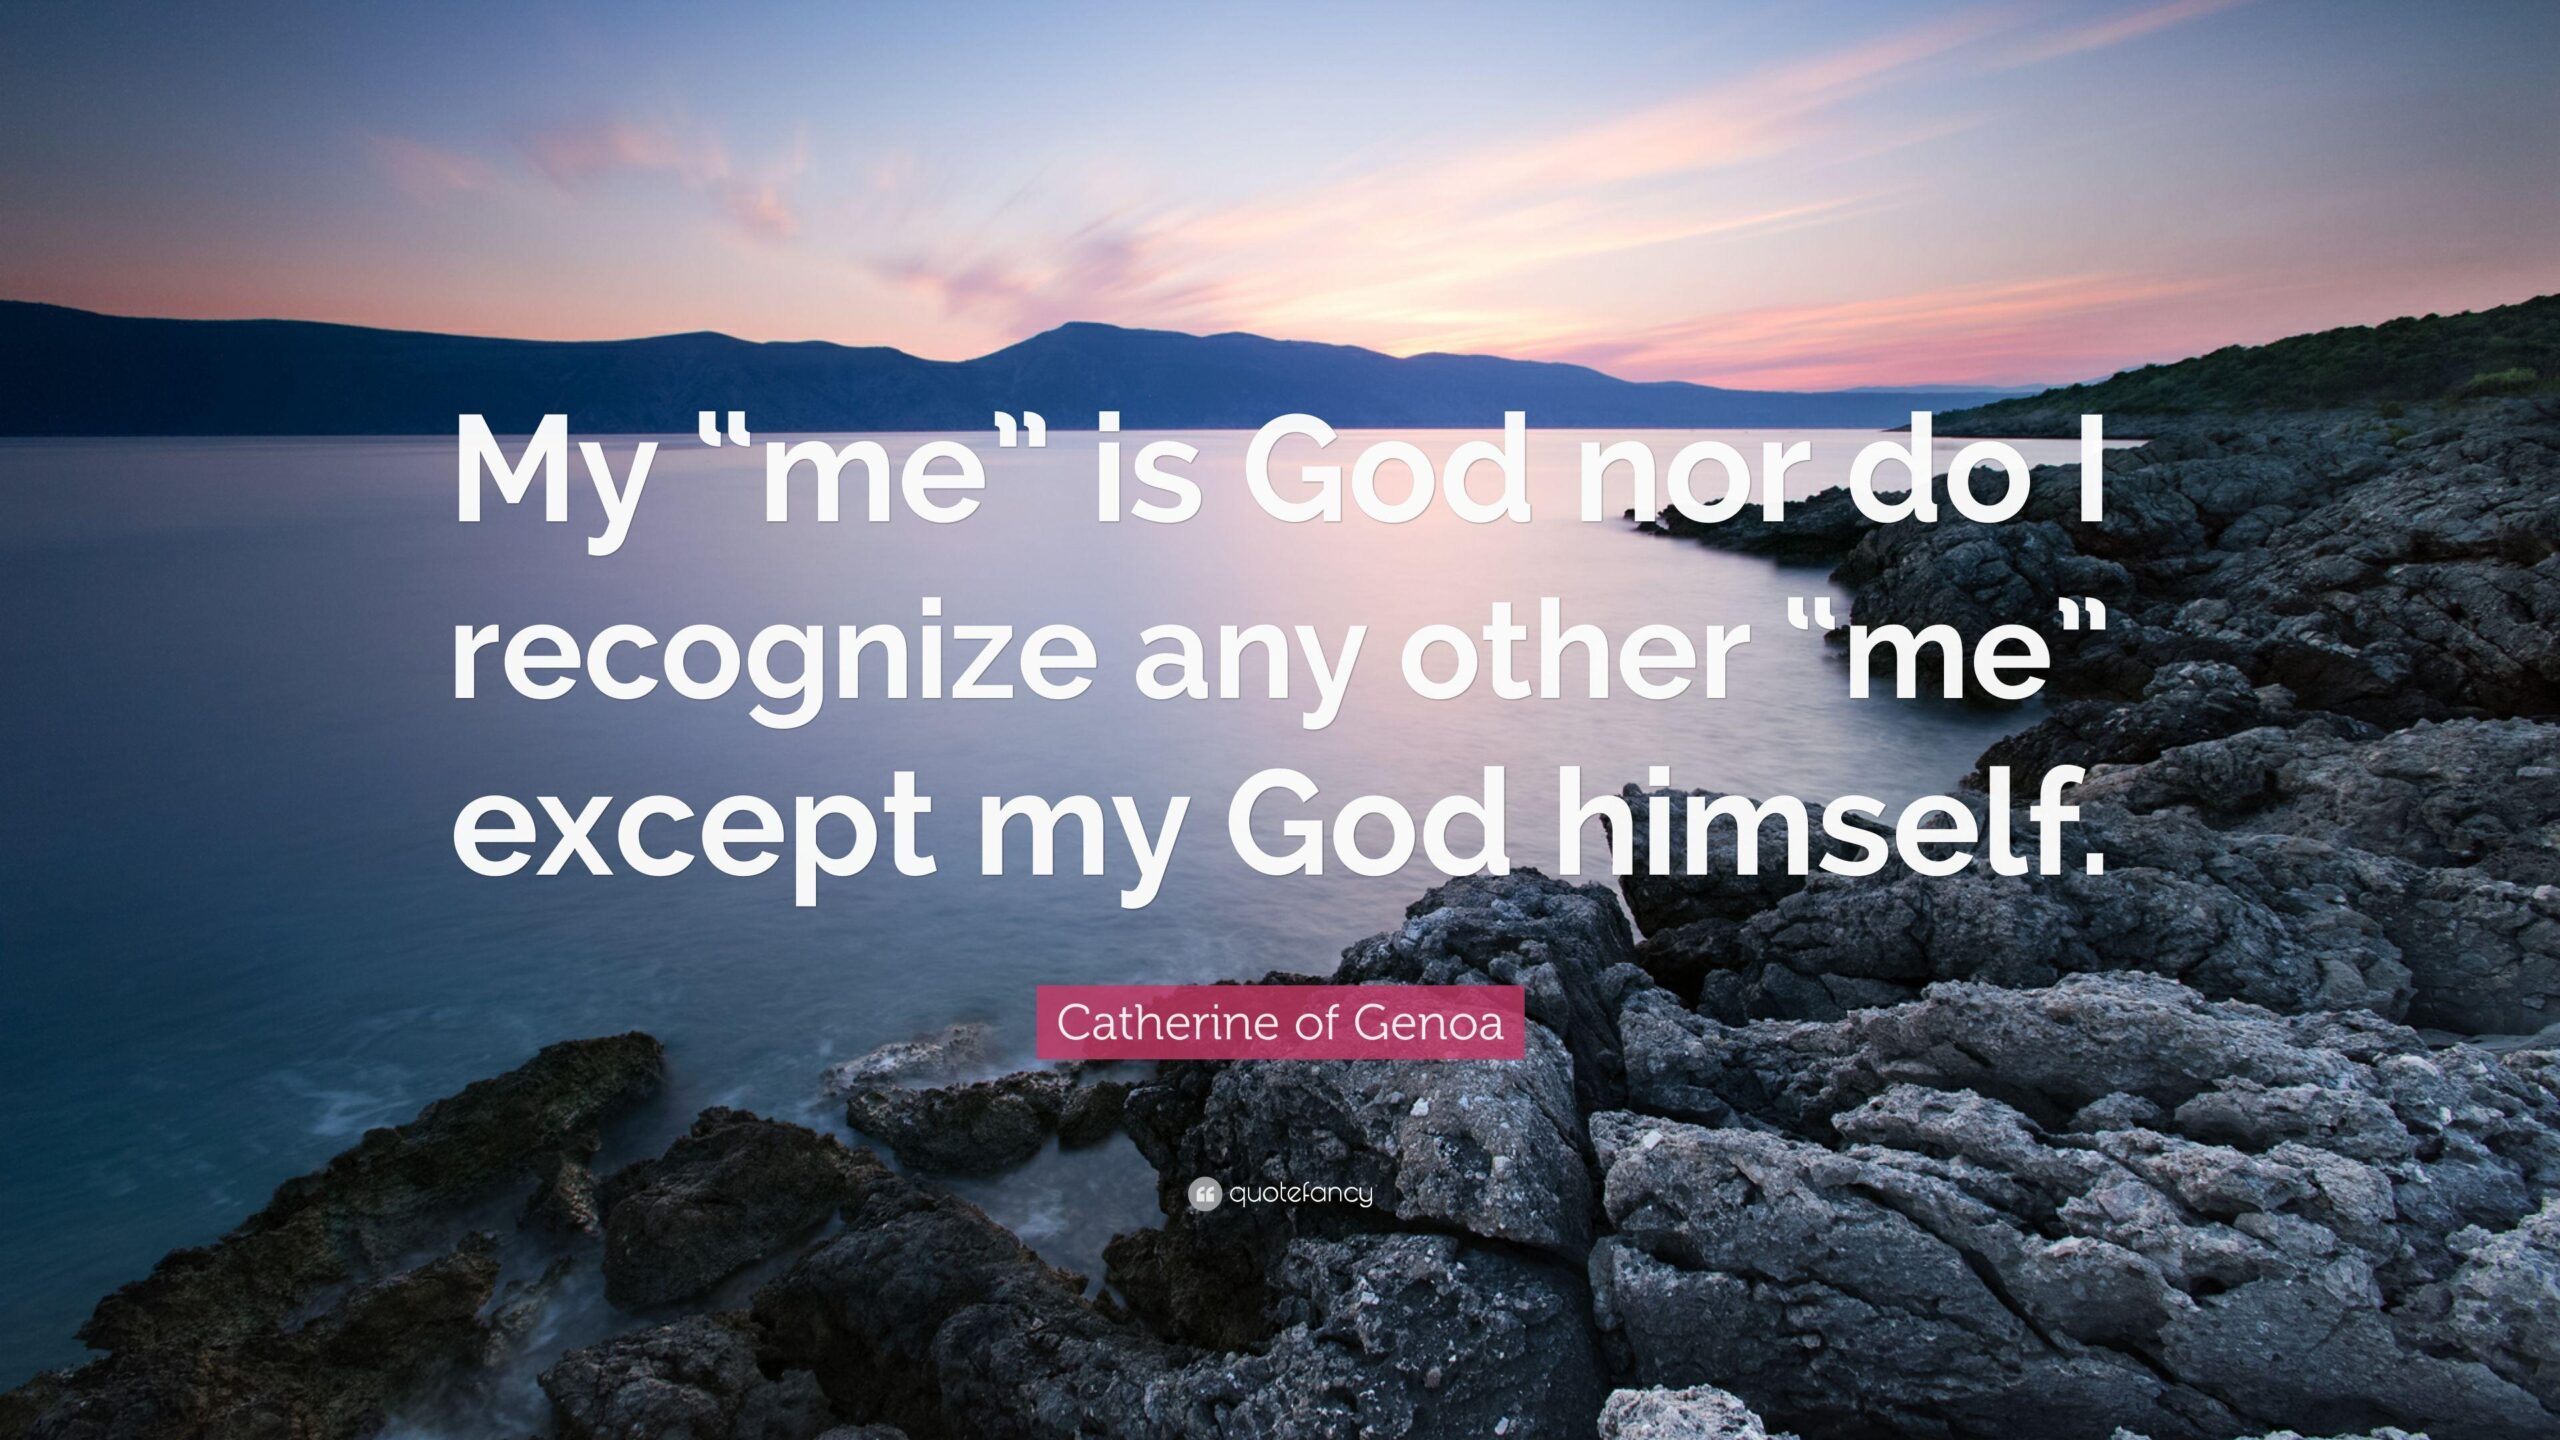 Catherine of Genoa Quote “My “me” is God nor do I recognize any